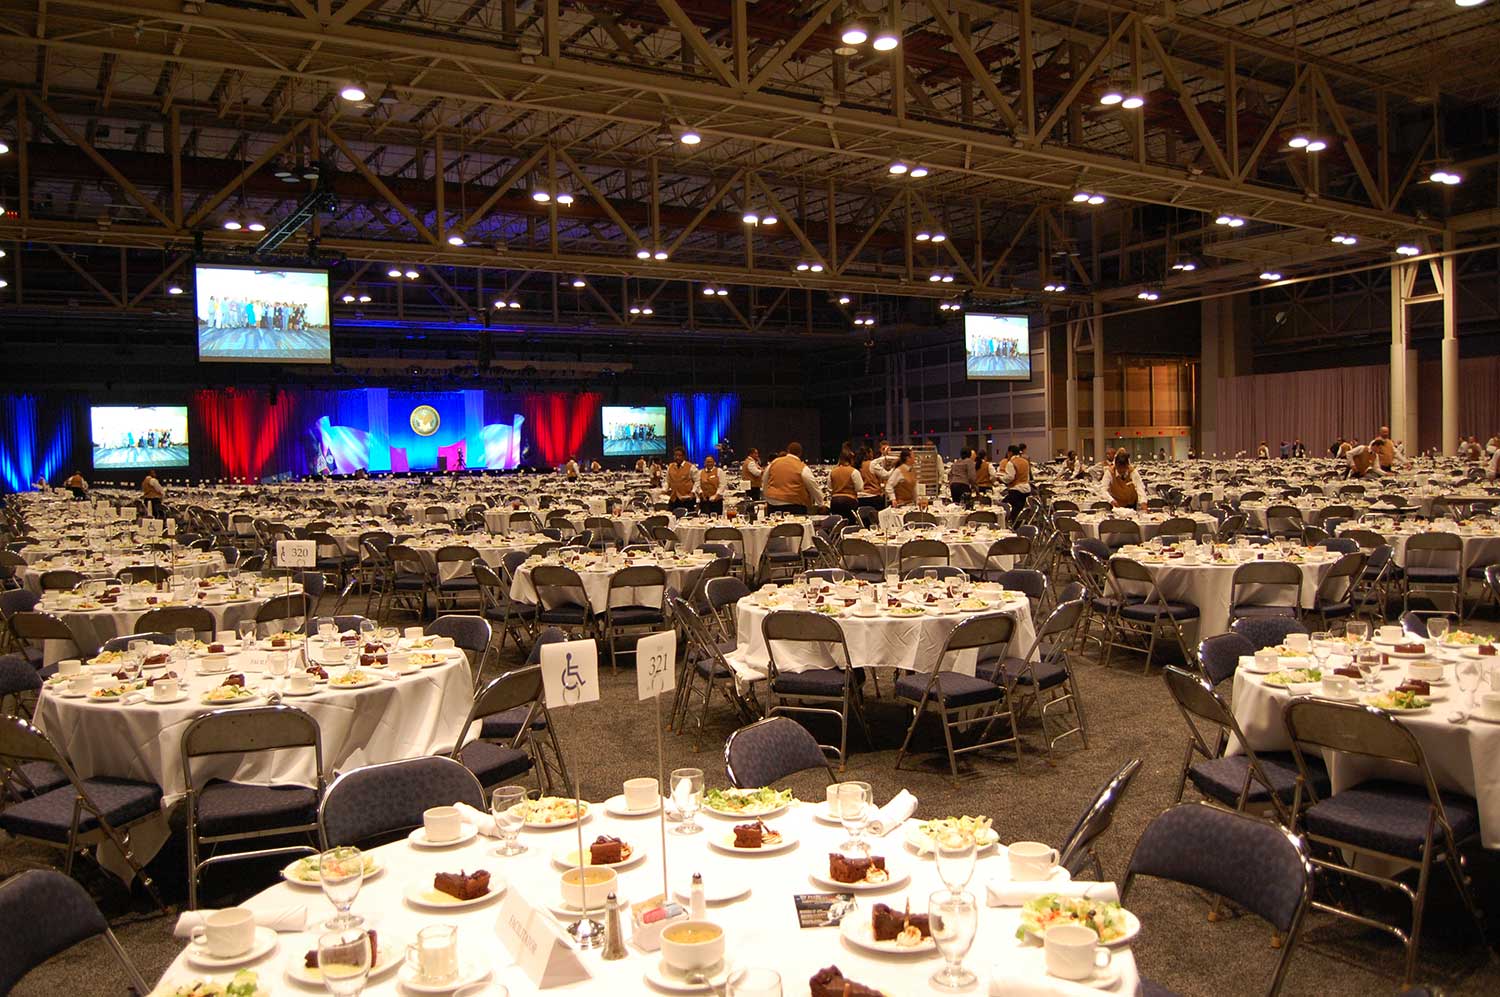 An event at the Convention Center